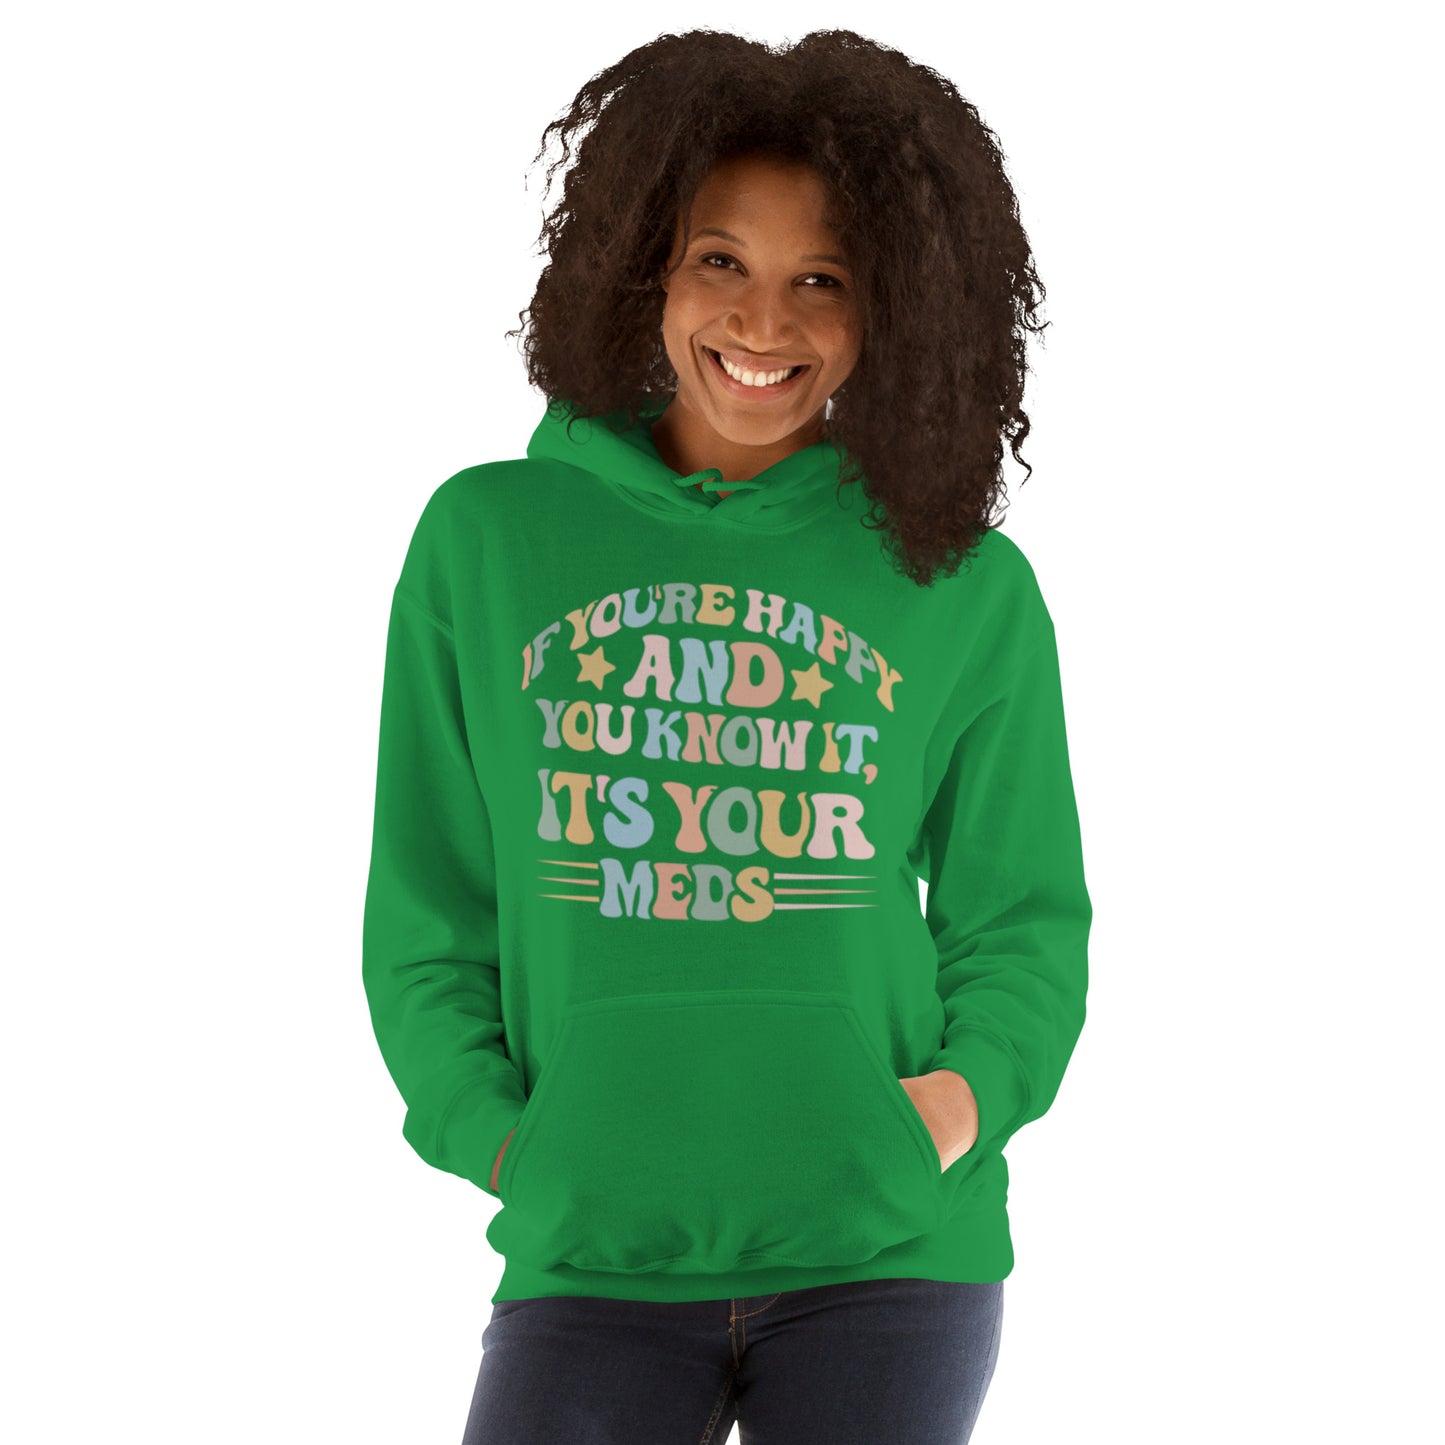 If You're Happy And You Know It, It's Your Meds Unisex Hoodie